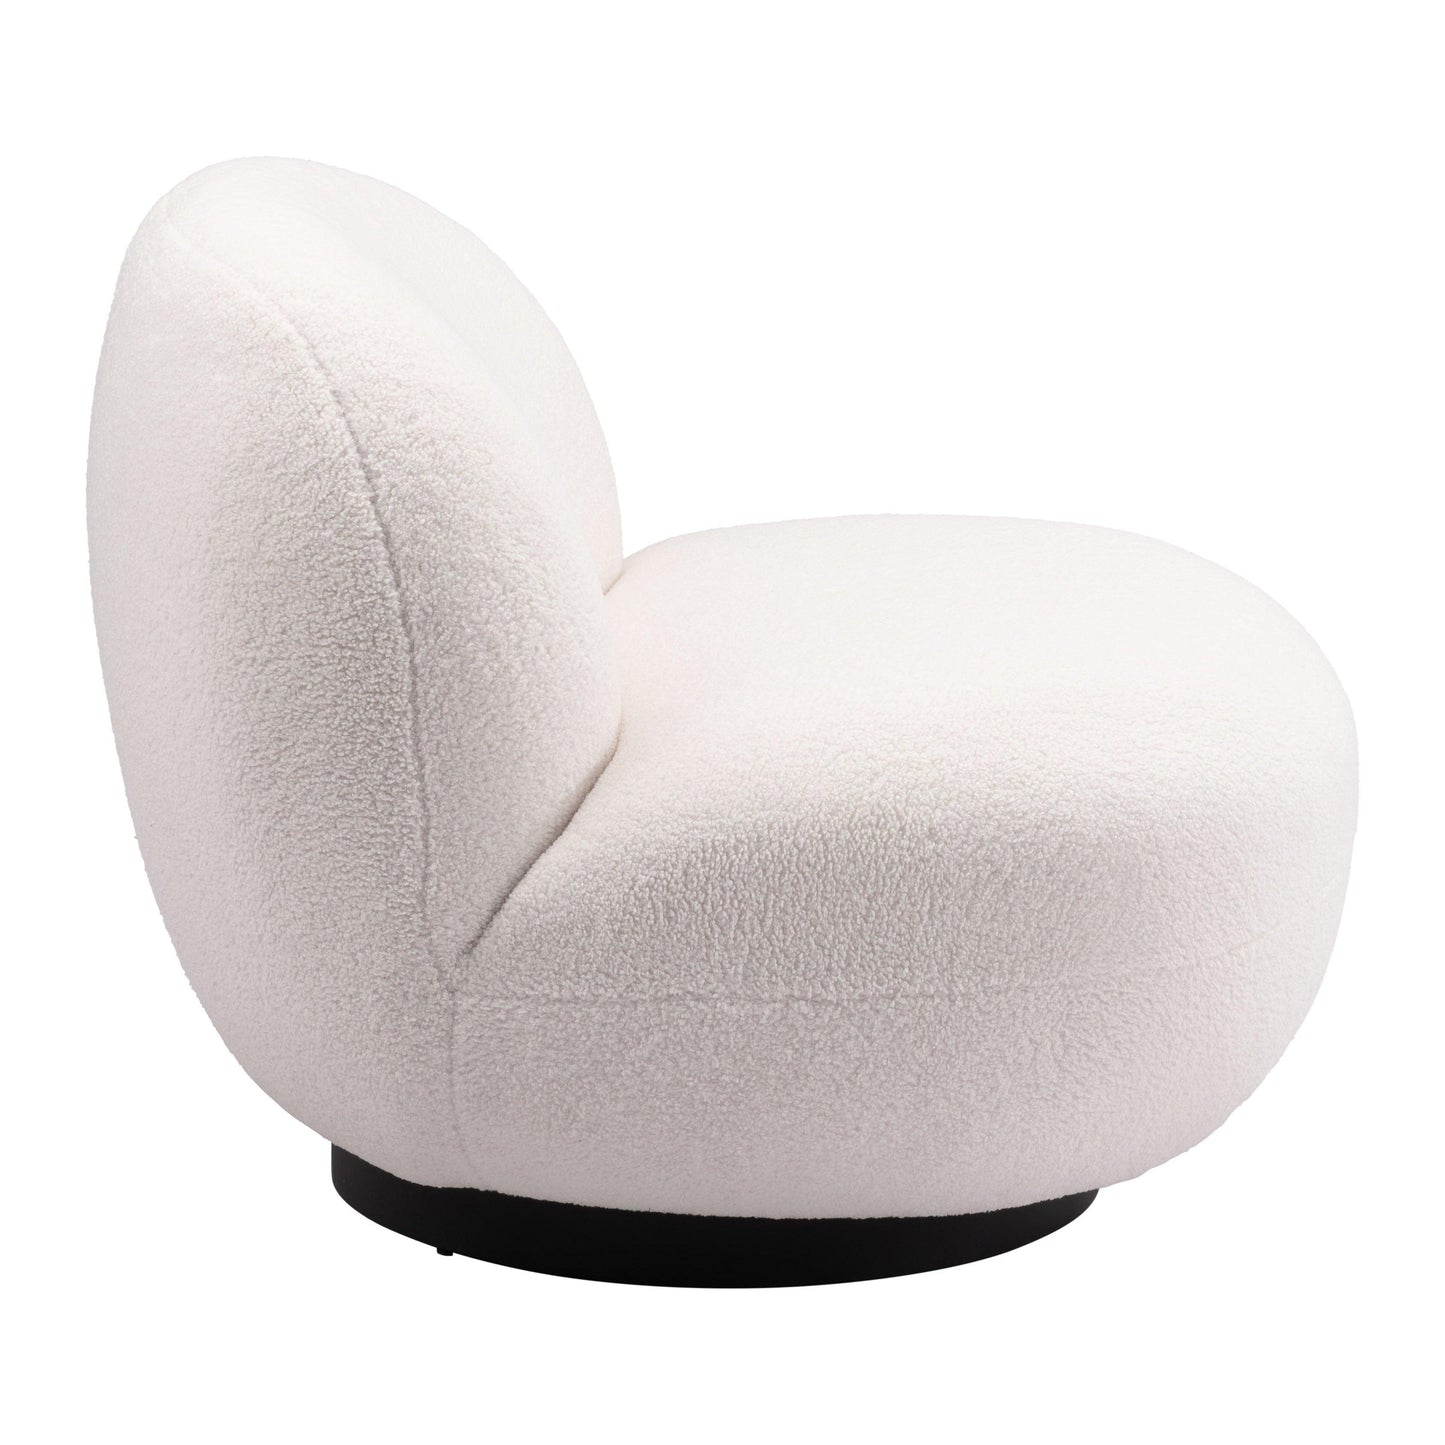 Myanmar Accent Chair Cream - Sideboards and Things Brand_Zuo Modern, Color_Black, Color_White, Features_Swivel, Finish_Powder Coated, Materials_Metal, Materials_Wood, Metal Type_Steel, Product Type_Occasional Chair, Upholstery Type_Fabric Blend, Upholstery Type_Polyester, Wood Species_Plywood